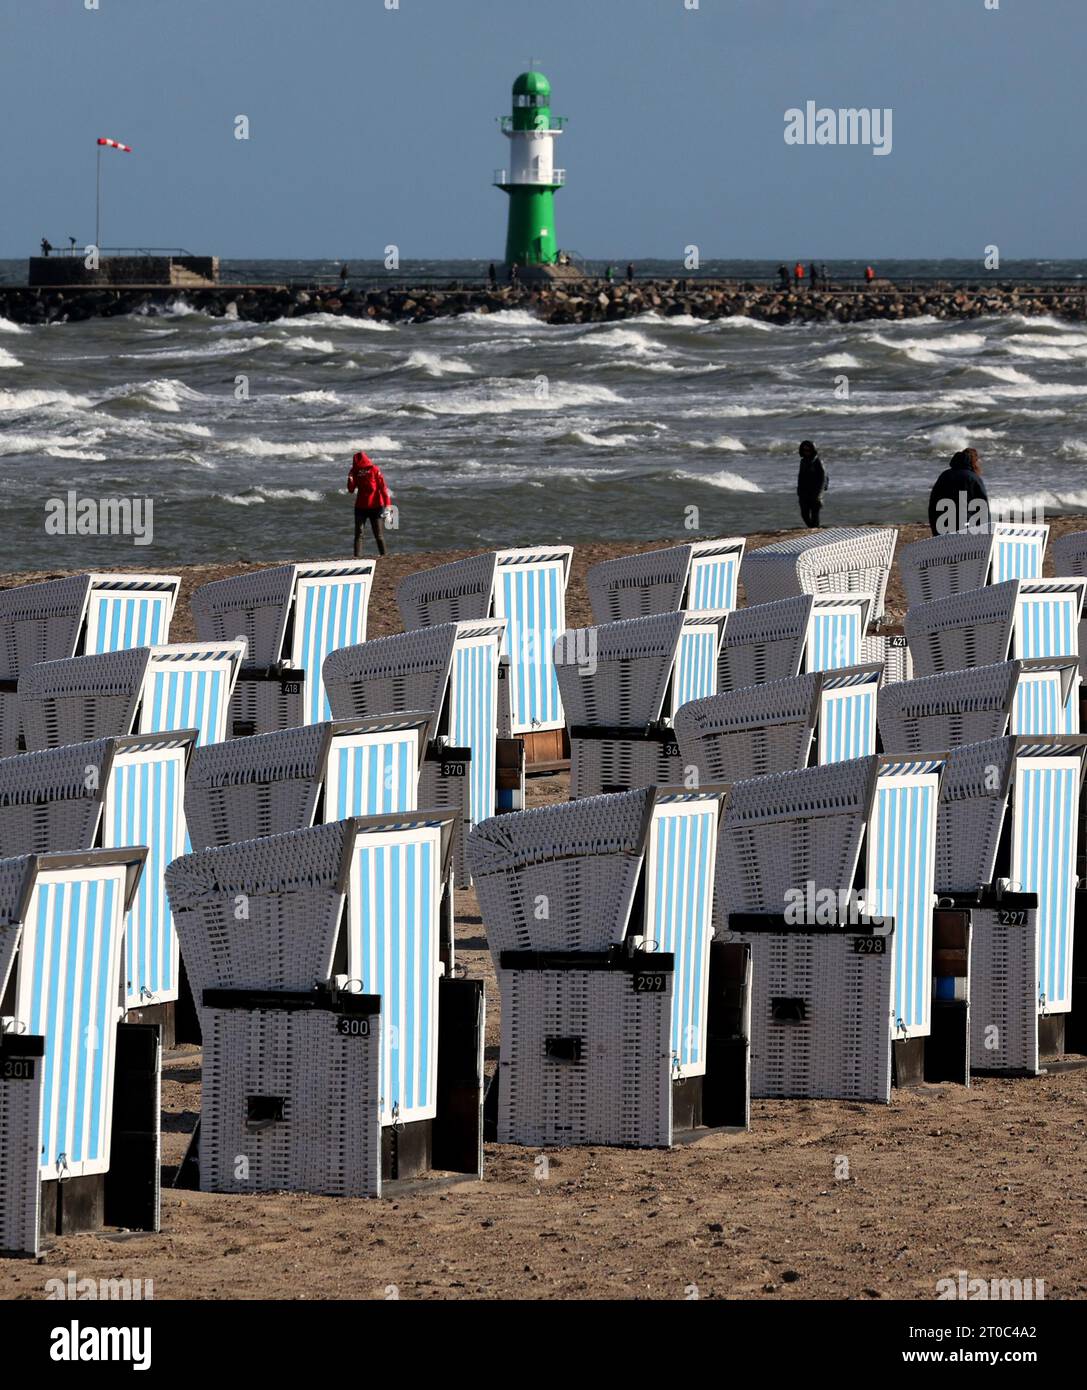 PRODUCTION - 05 October 2023, Mecklenburg-Western Pomerania, Warnemünde: There are still many beach chairs available for guests on the Baltic Sea beach. This will especially please vacationers during the beginning autumn vacations. The beach chairs may remain standing until 15.10.2023, after which they must make way for coastal protection for the upcoming autumn storms, according to Schwerin's Ministry of the Environment. Photo: Bernd Wüstneck/dpa Stock Photo